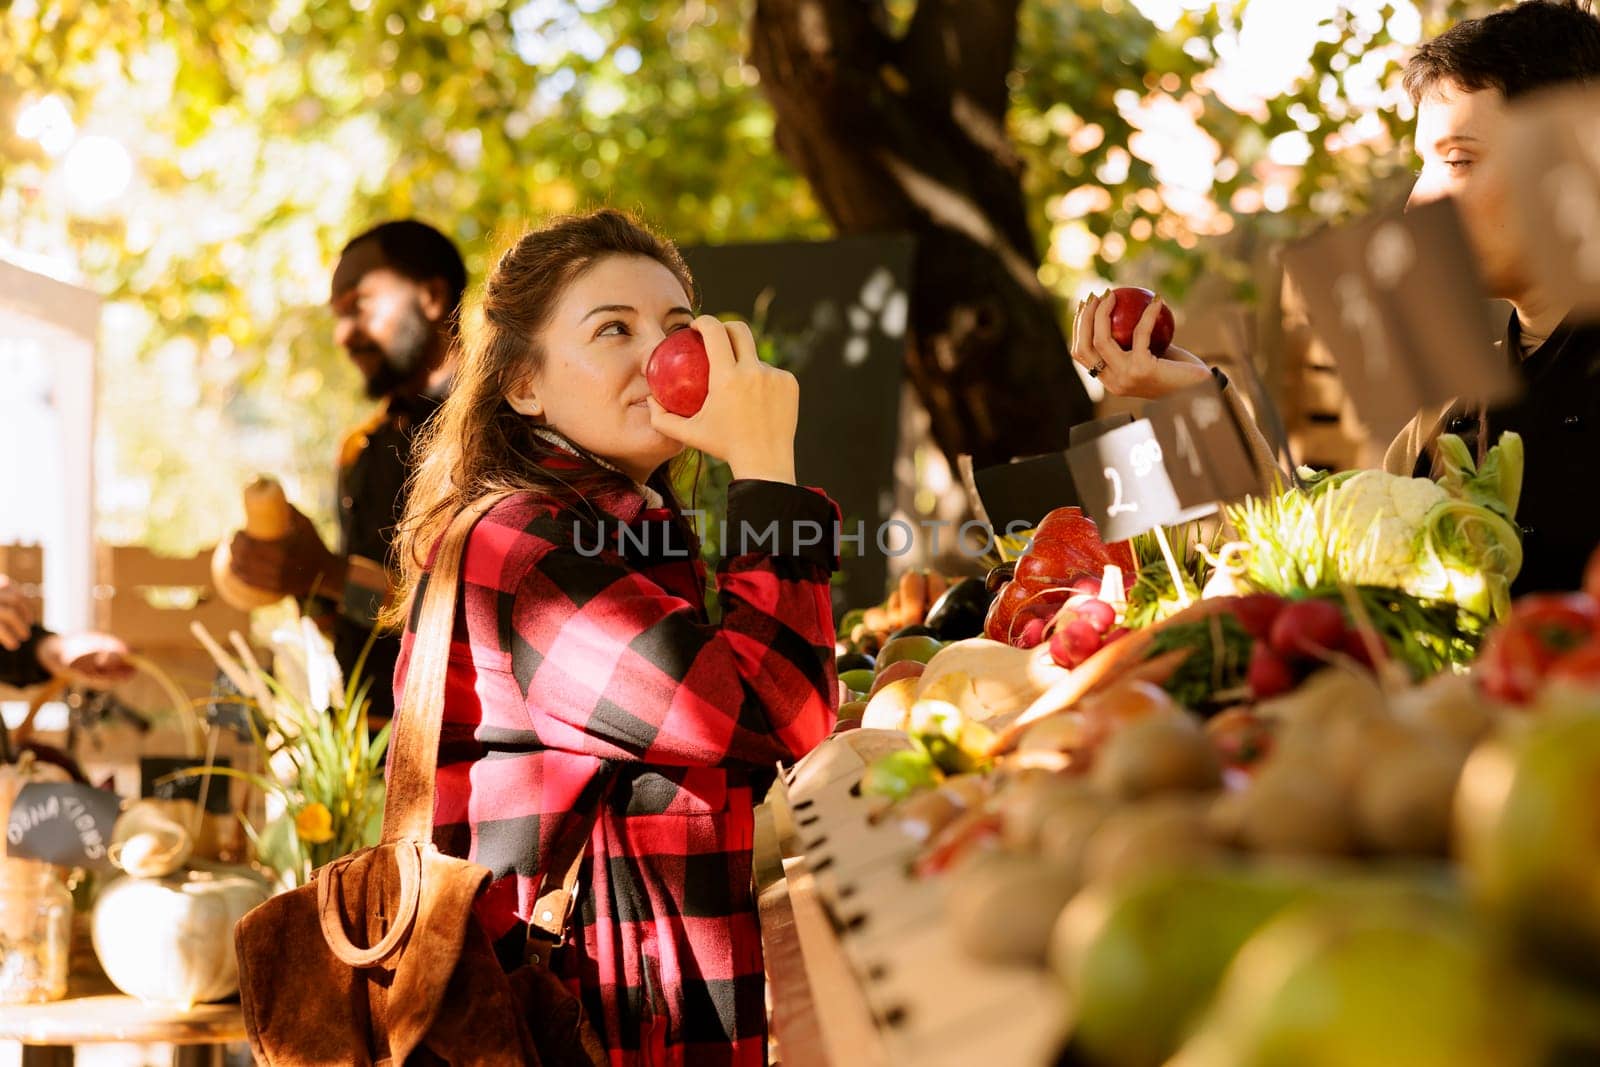 Standing in front of the farmers market stand, healthy customer enjoys the organic natural smell of apples. Before purchasing homegrown eco produce from the counter, a woman smells bio fruits.